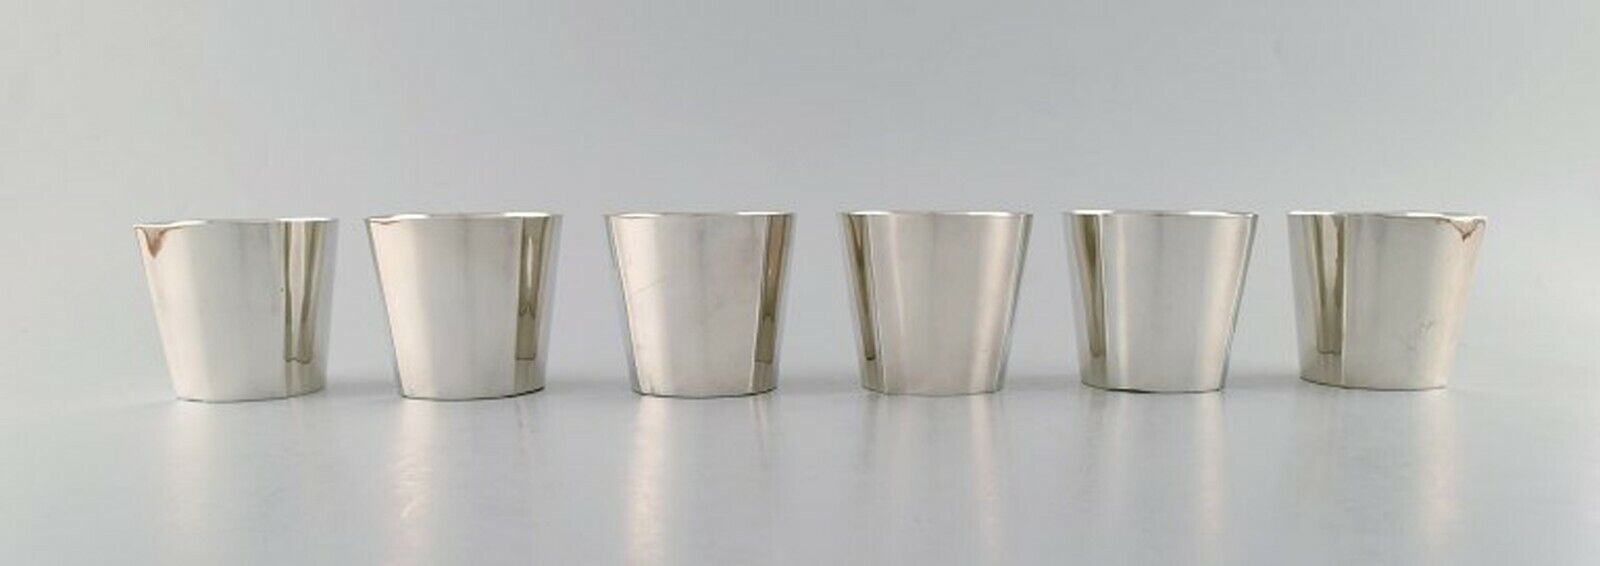 Sigvard Bernadotte for Gense. A set of 6 hunting/vodka beakers in plated silver.